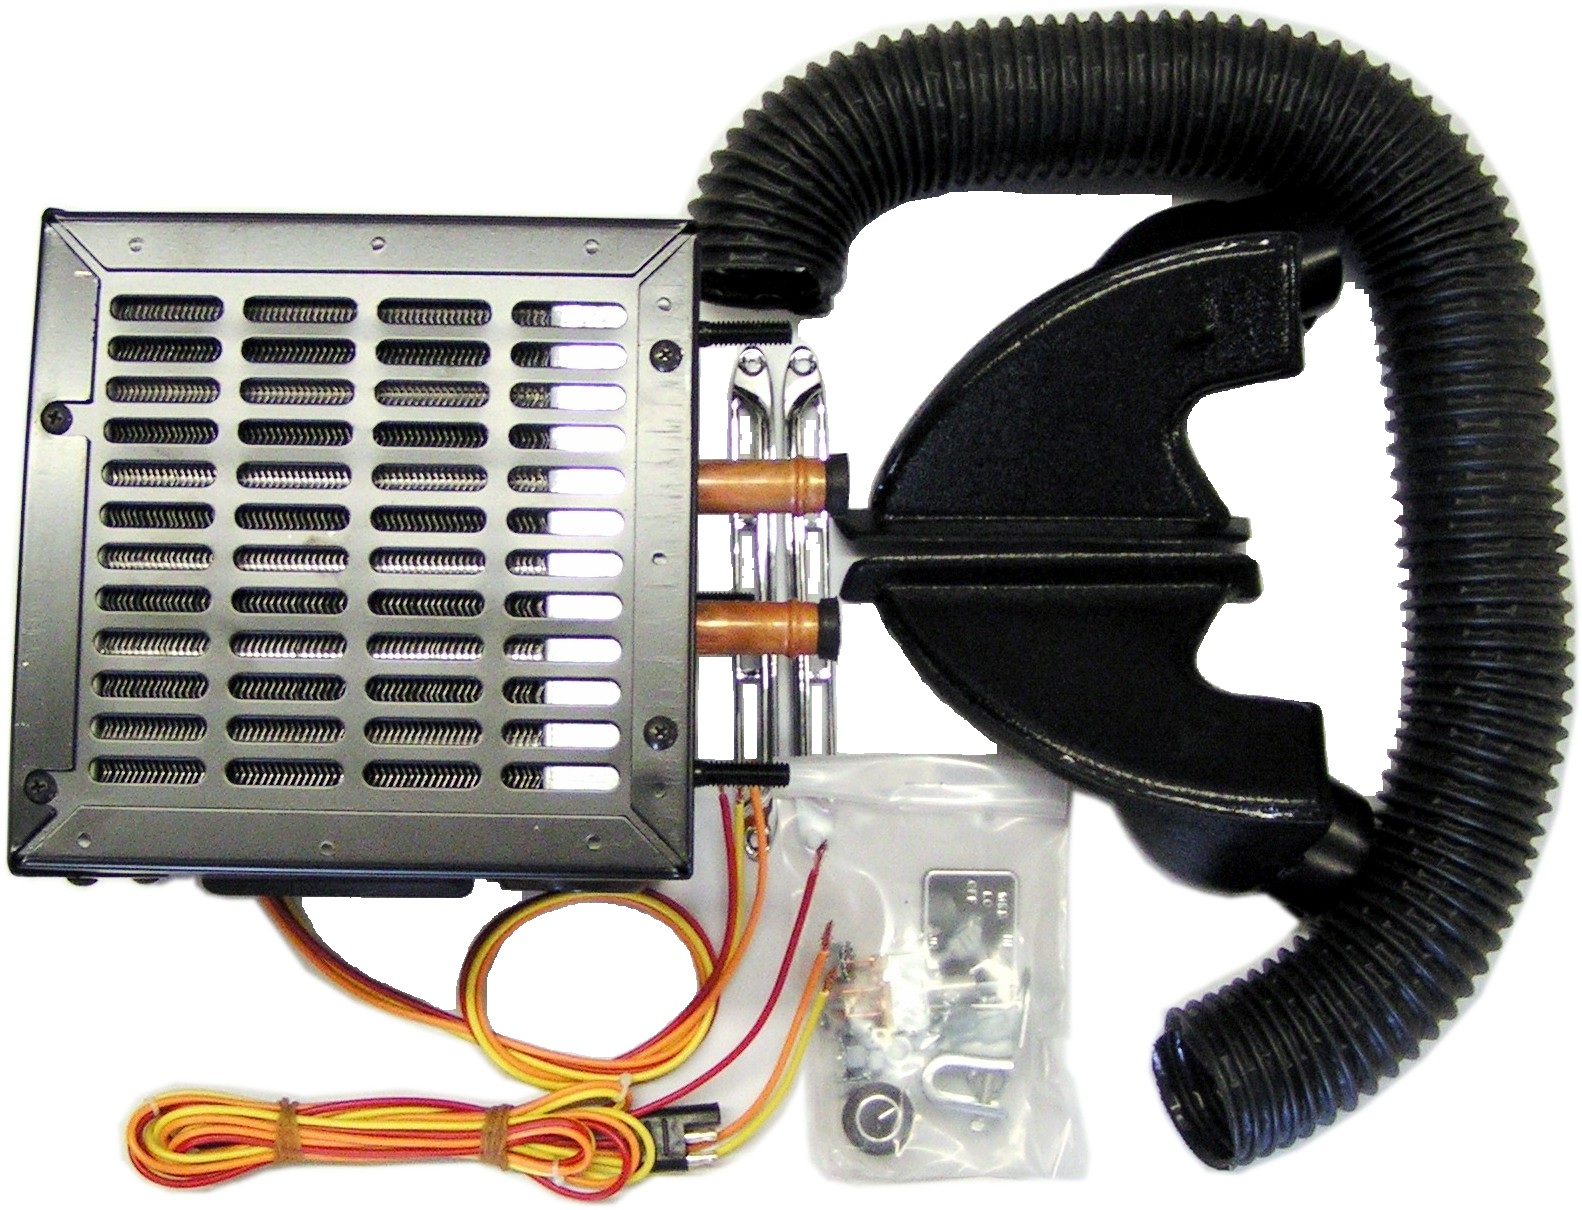 Heater Kit with Ducts, Grills, 3 speed Fan